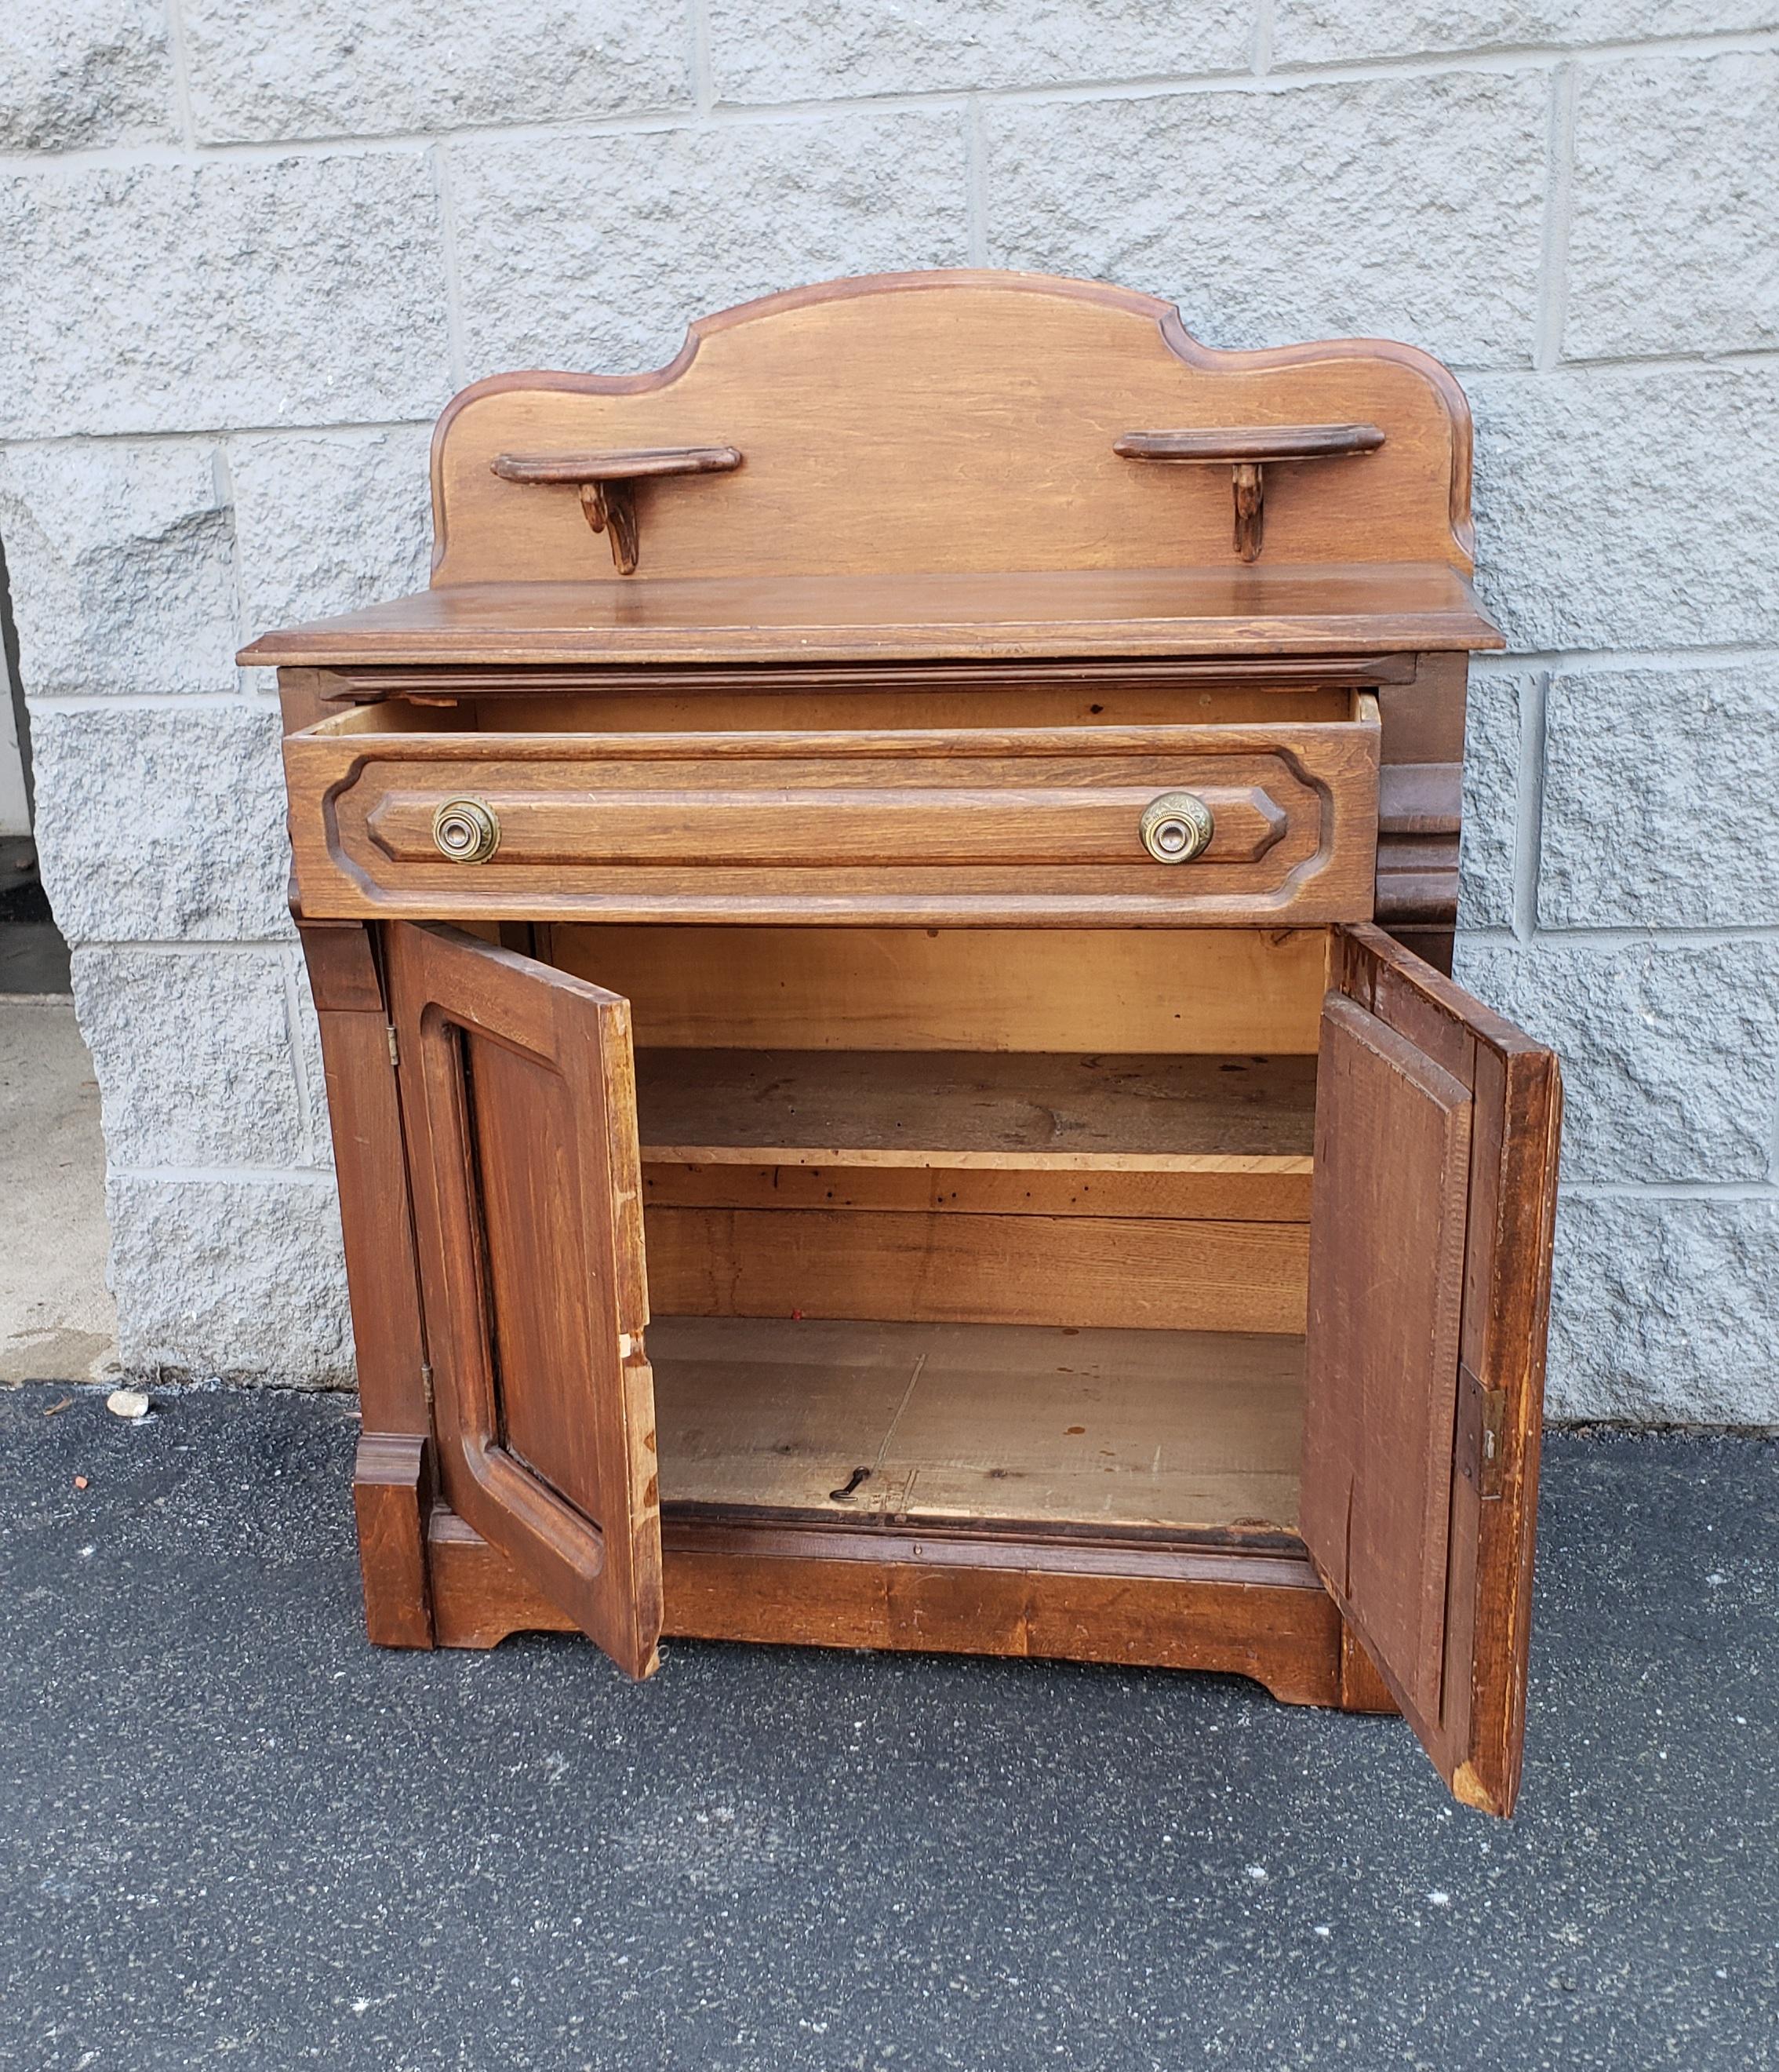 An early 20th century american fruitwood washstand featuring a single large drawer with peg joints,, a lower storage with shelf. Very good antique condition. Floor to counter top is 27.75